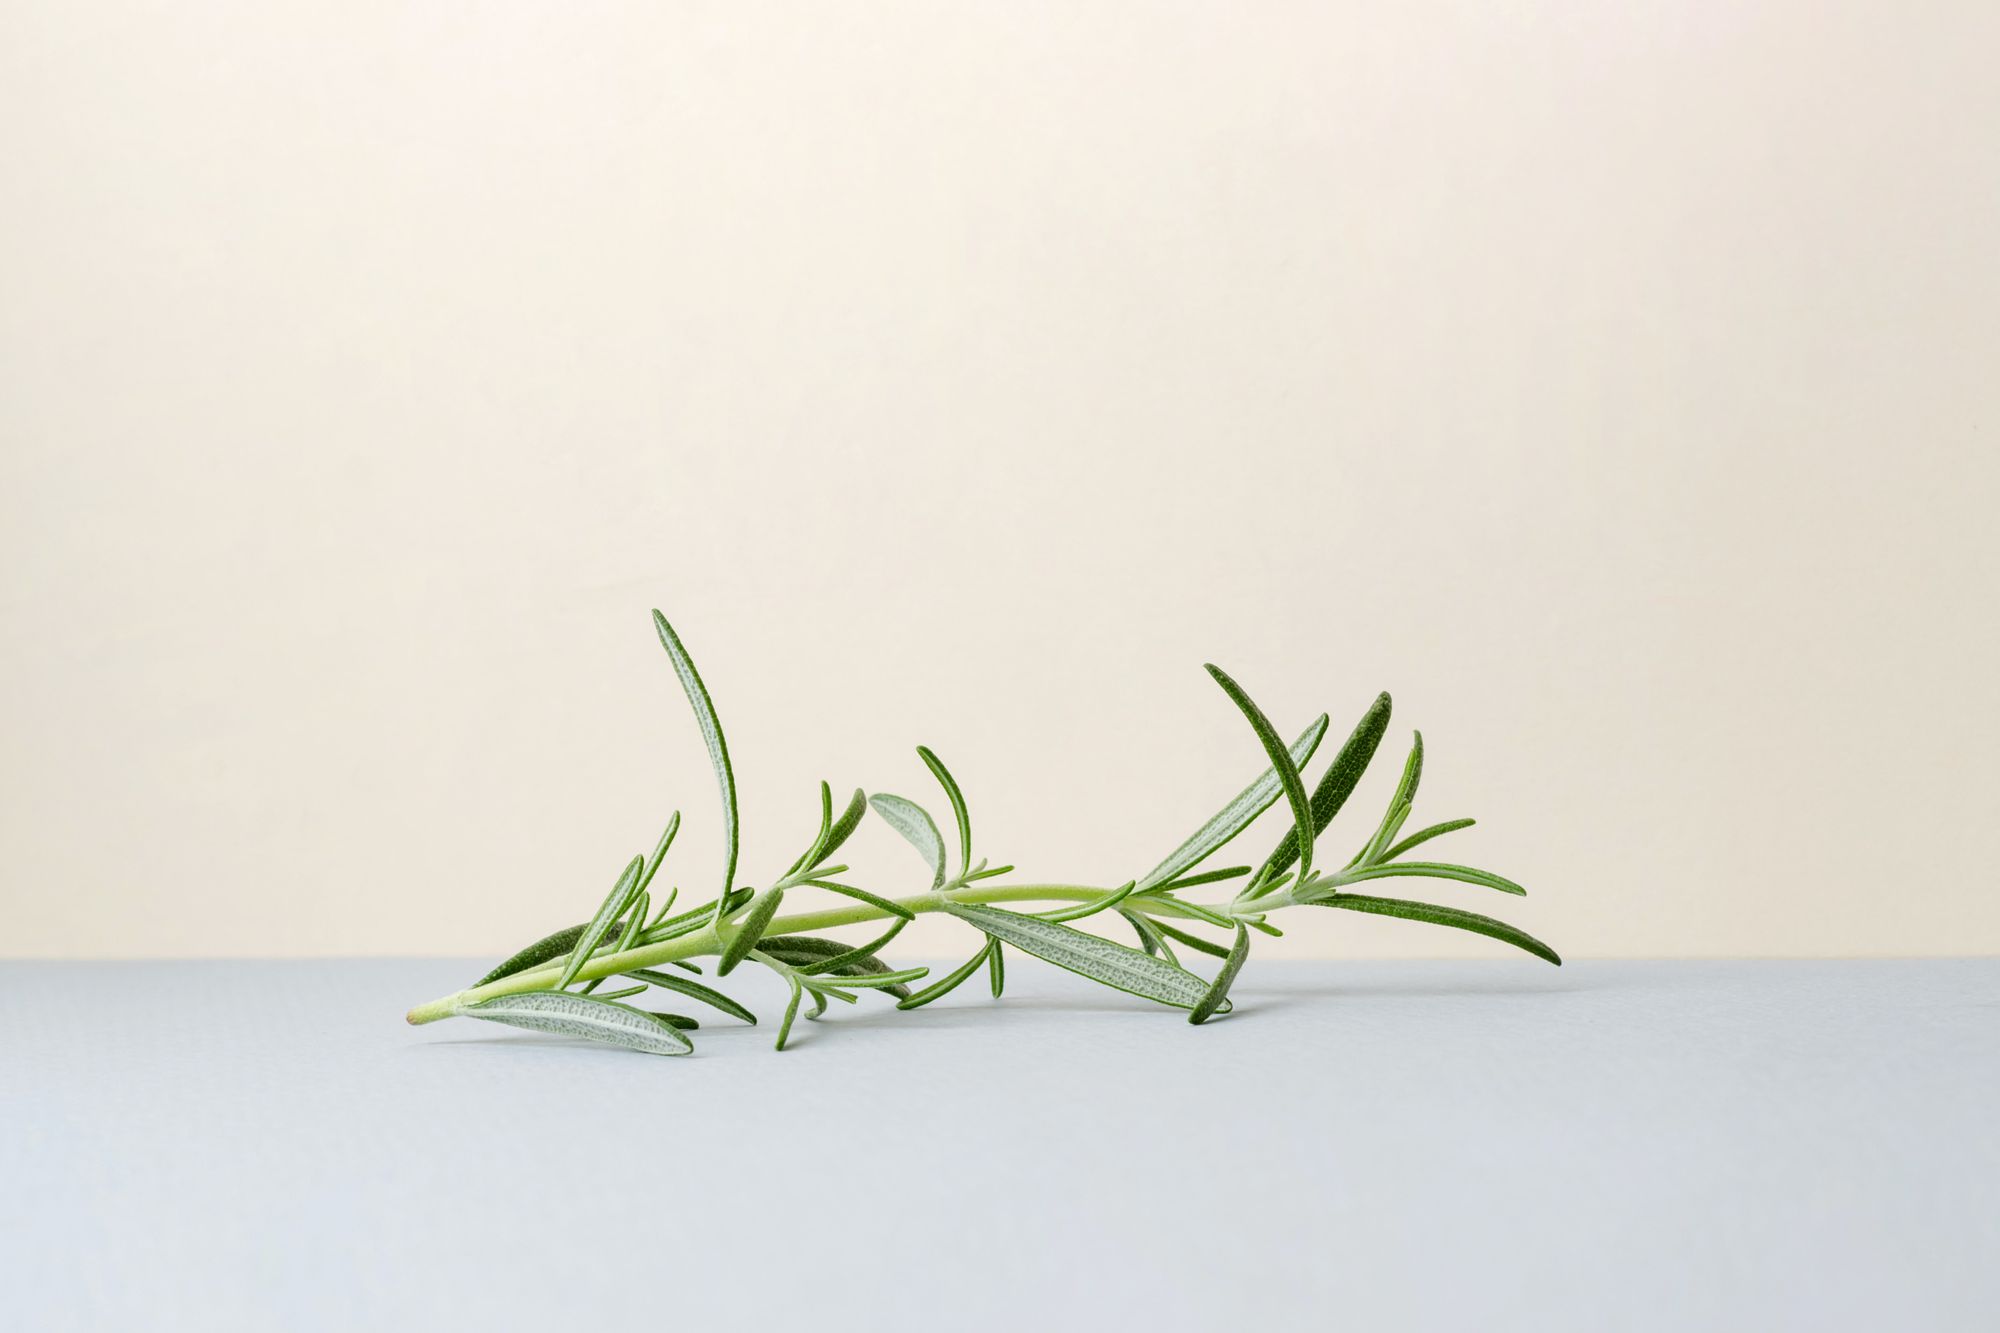 Rosemary scent improves memory